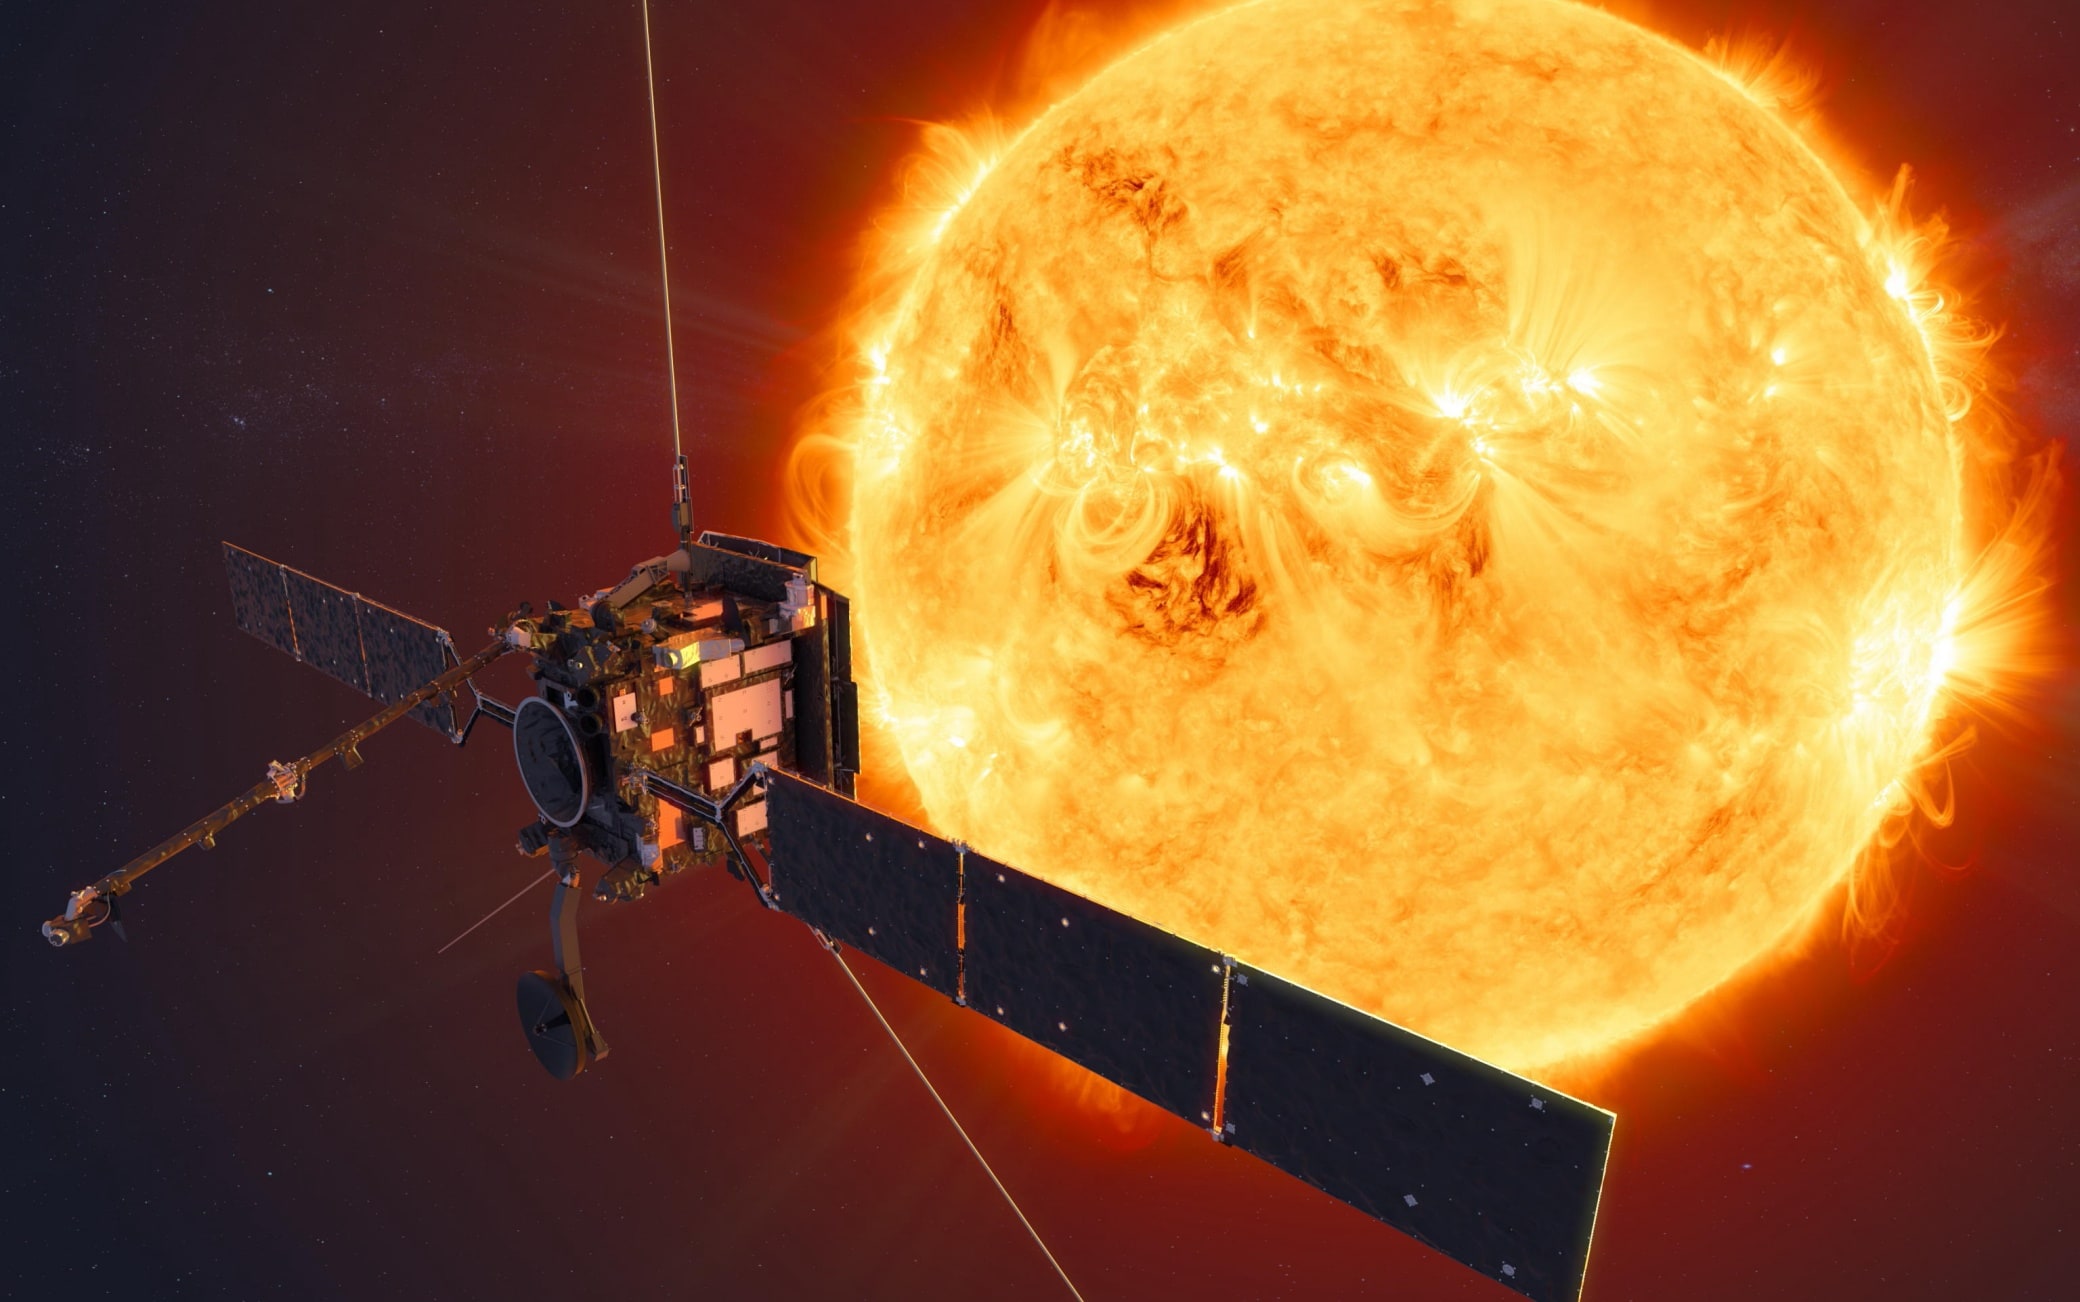 Space, NASA’s Solar Orbiter Probe is ready for a “close” encounter with the Sun